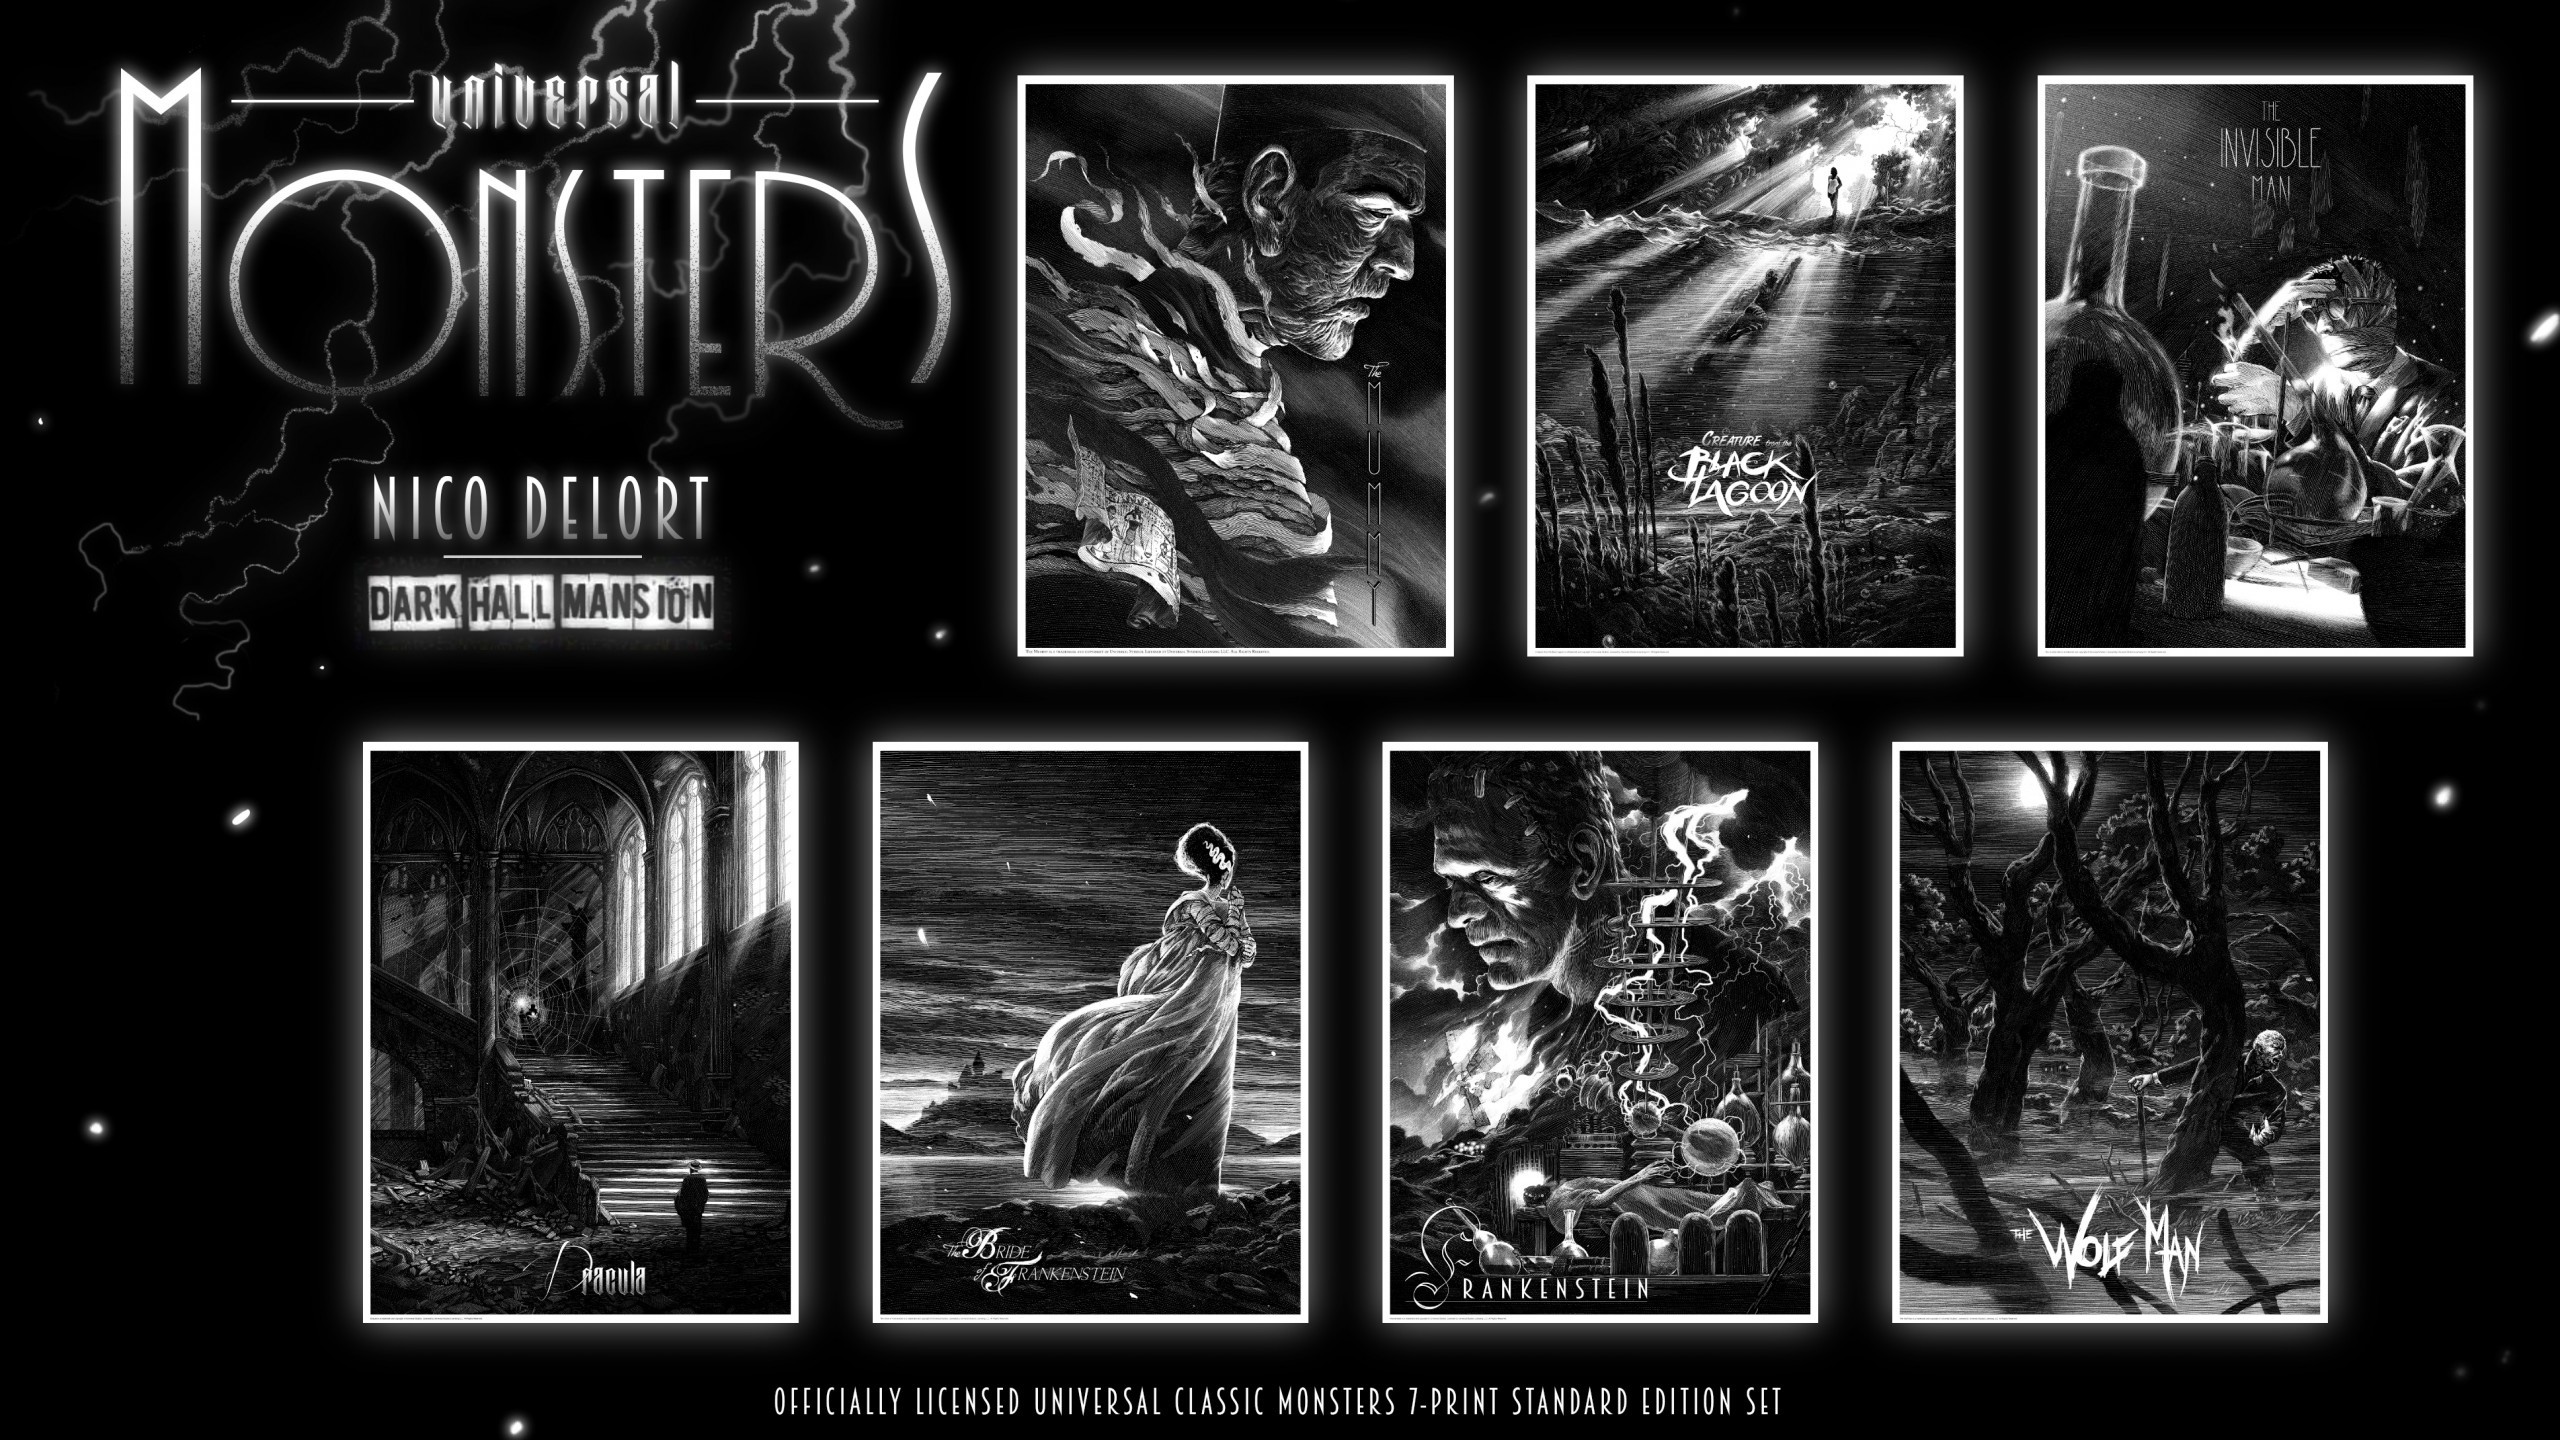 2560x1440 Download Universal monsters checks, Universal monsters coloring book  wallpaper